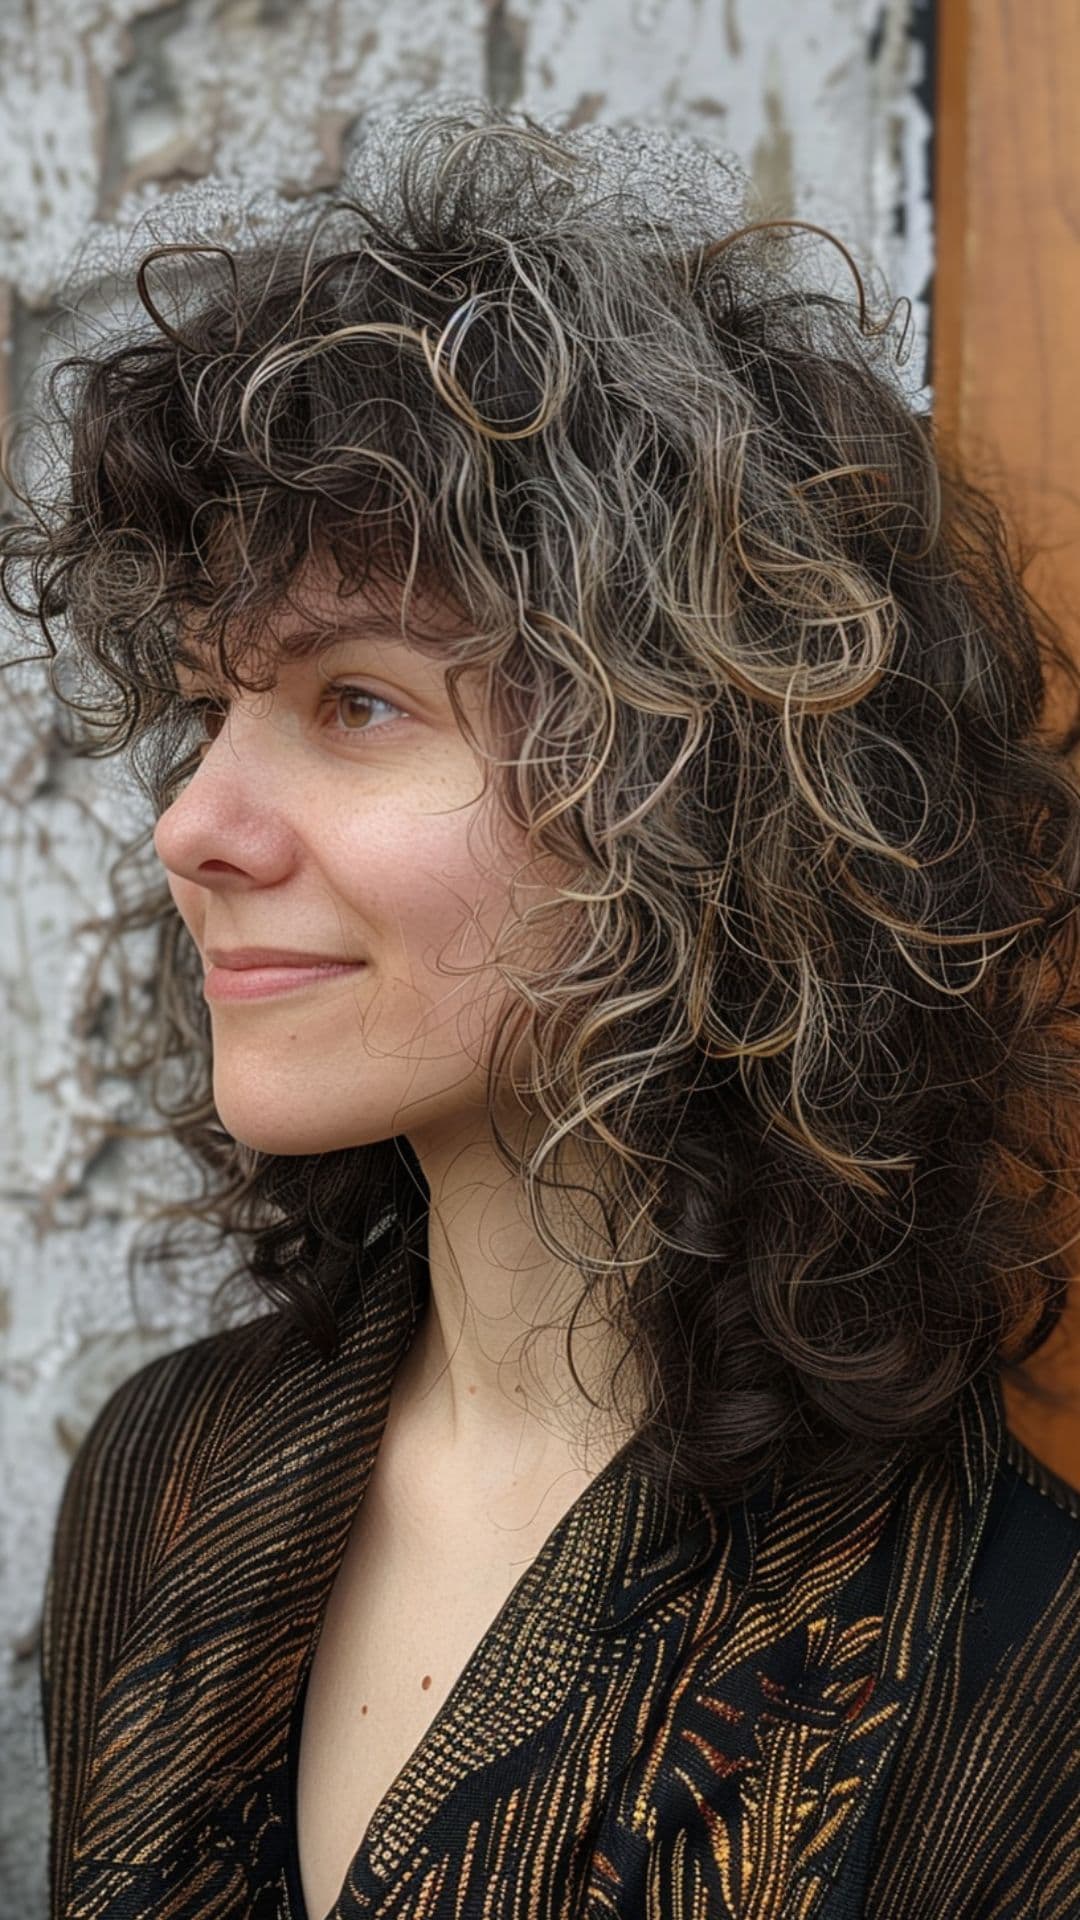 A woman modelling a curly wolf cut.